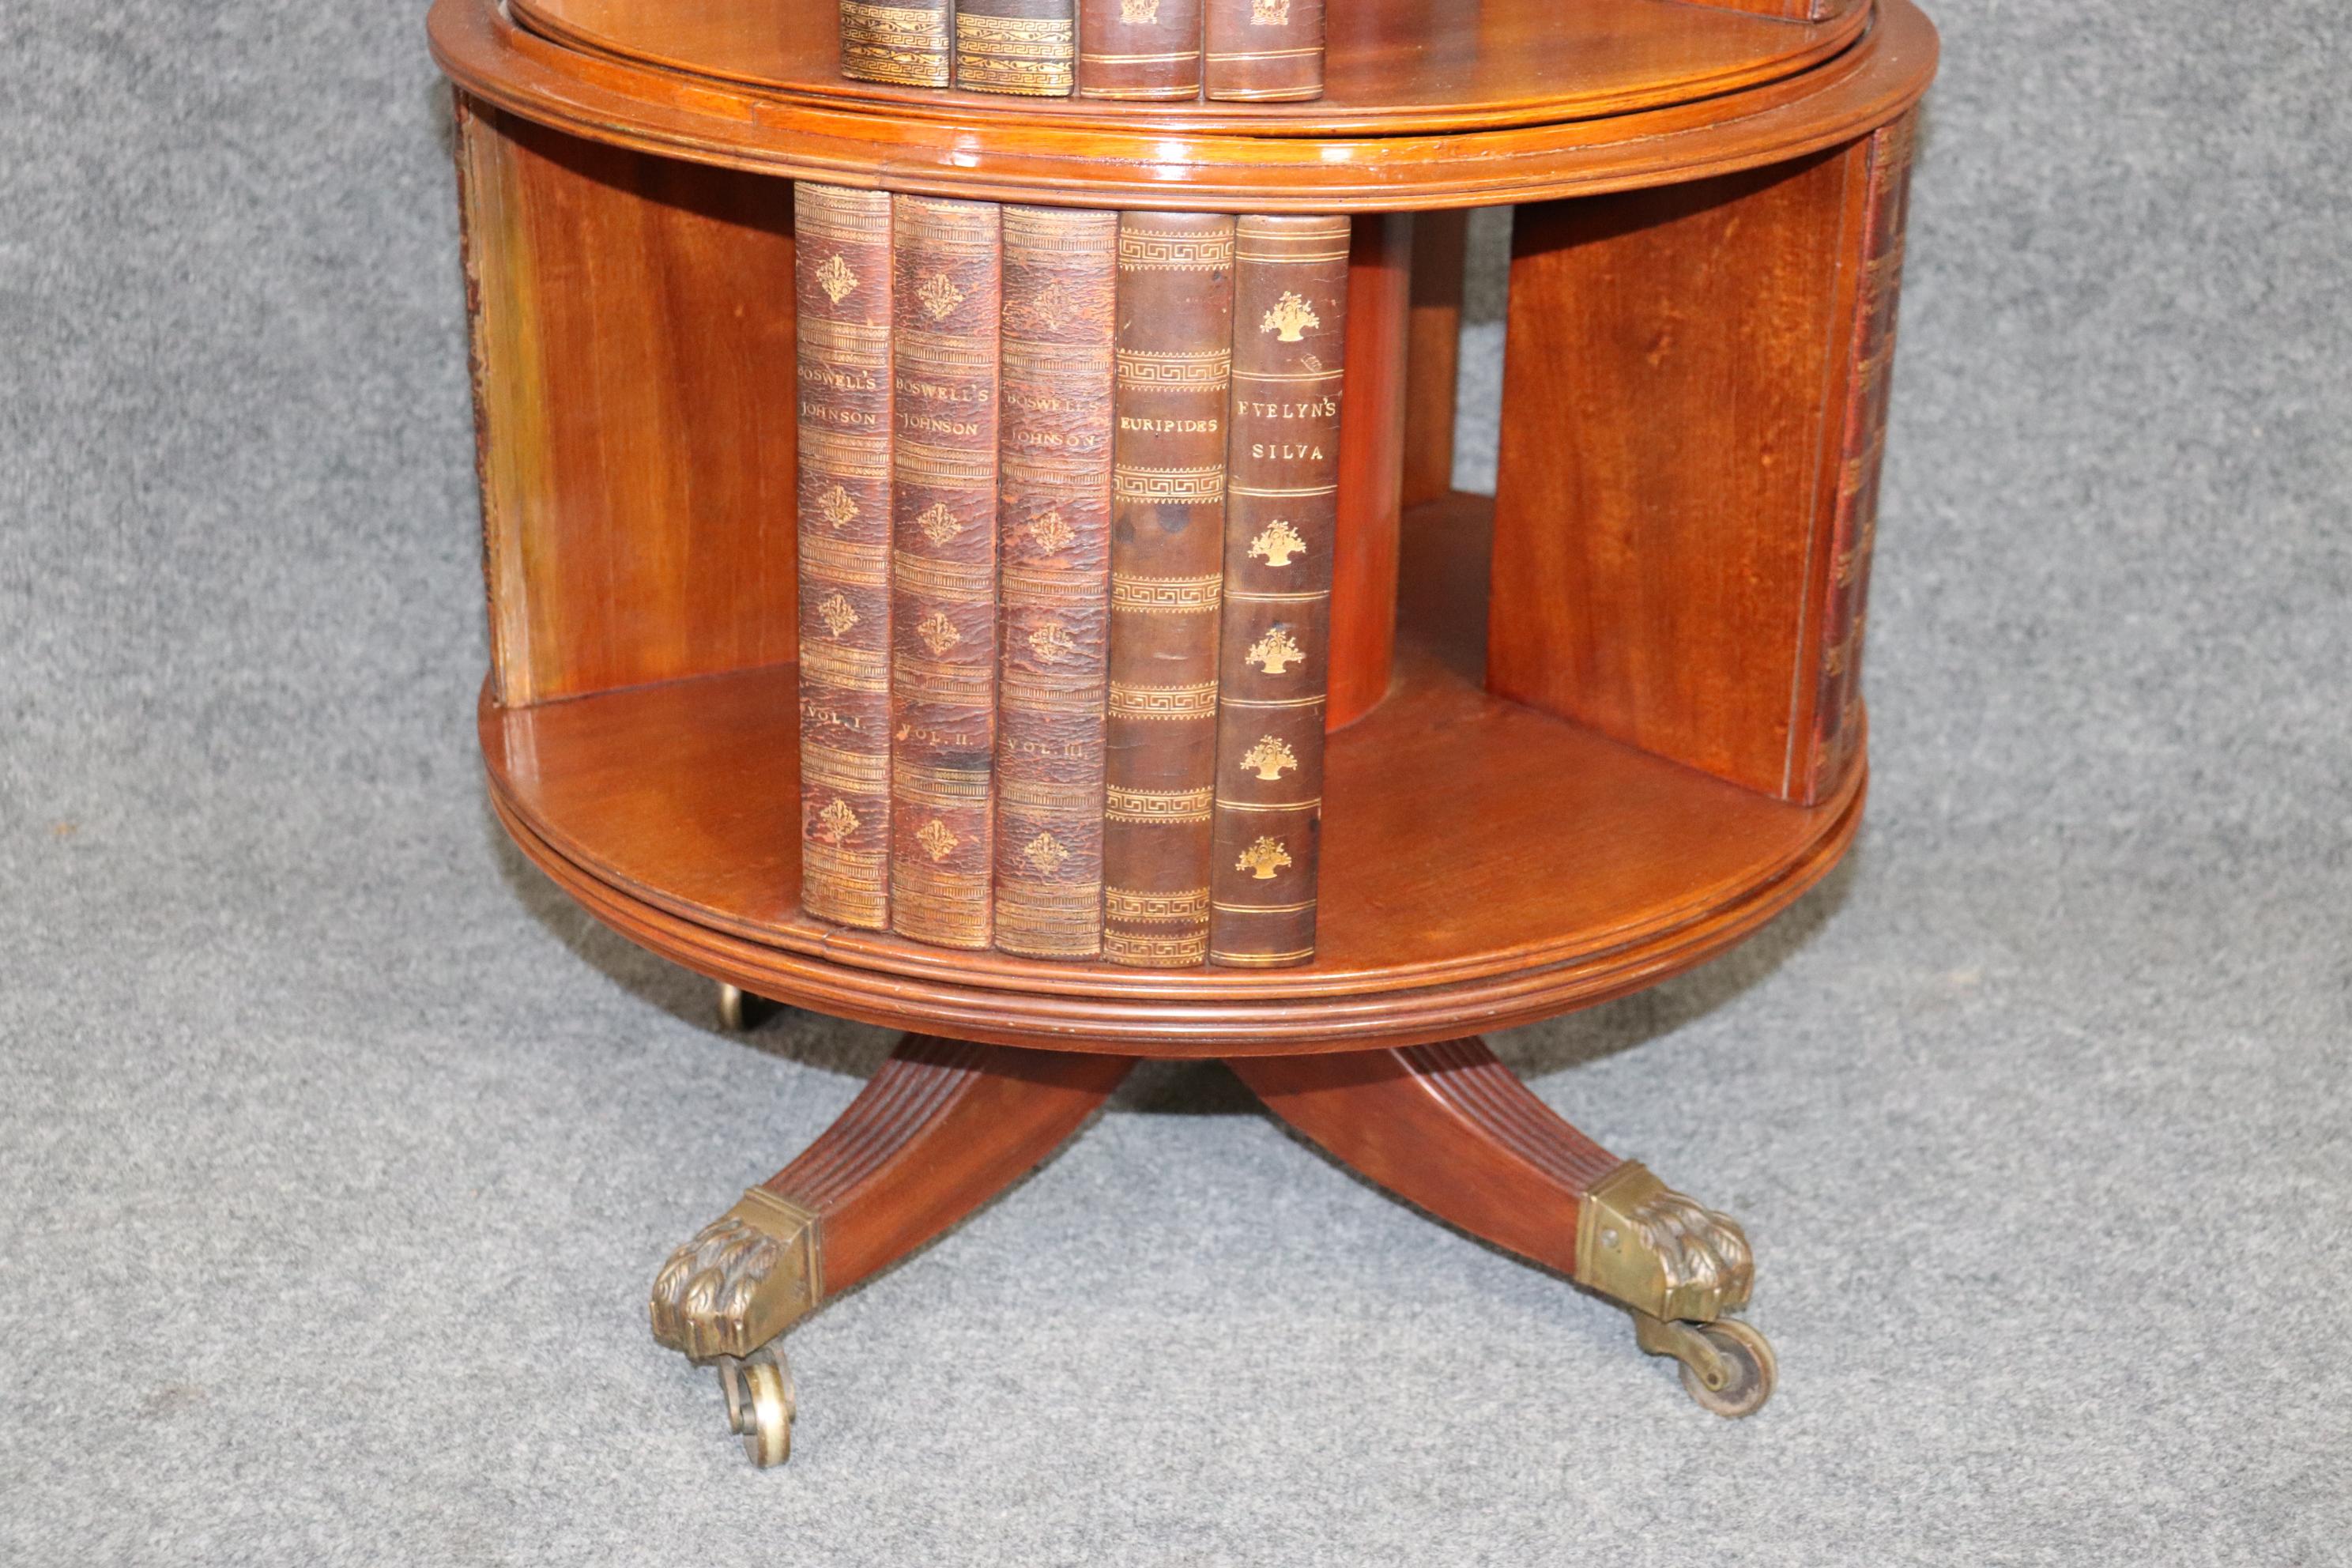 English Rare Graduated Tier Leather Bookend Divided George III Revolving Bookcase c 1910